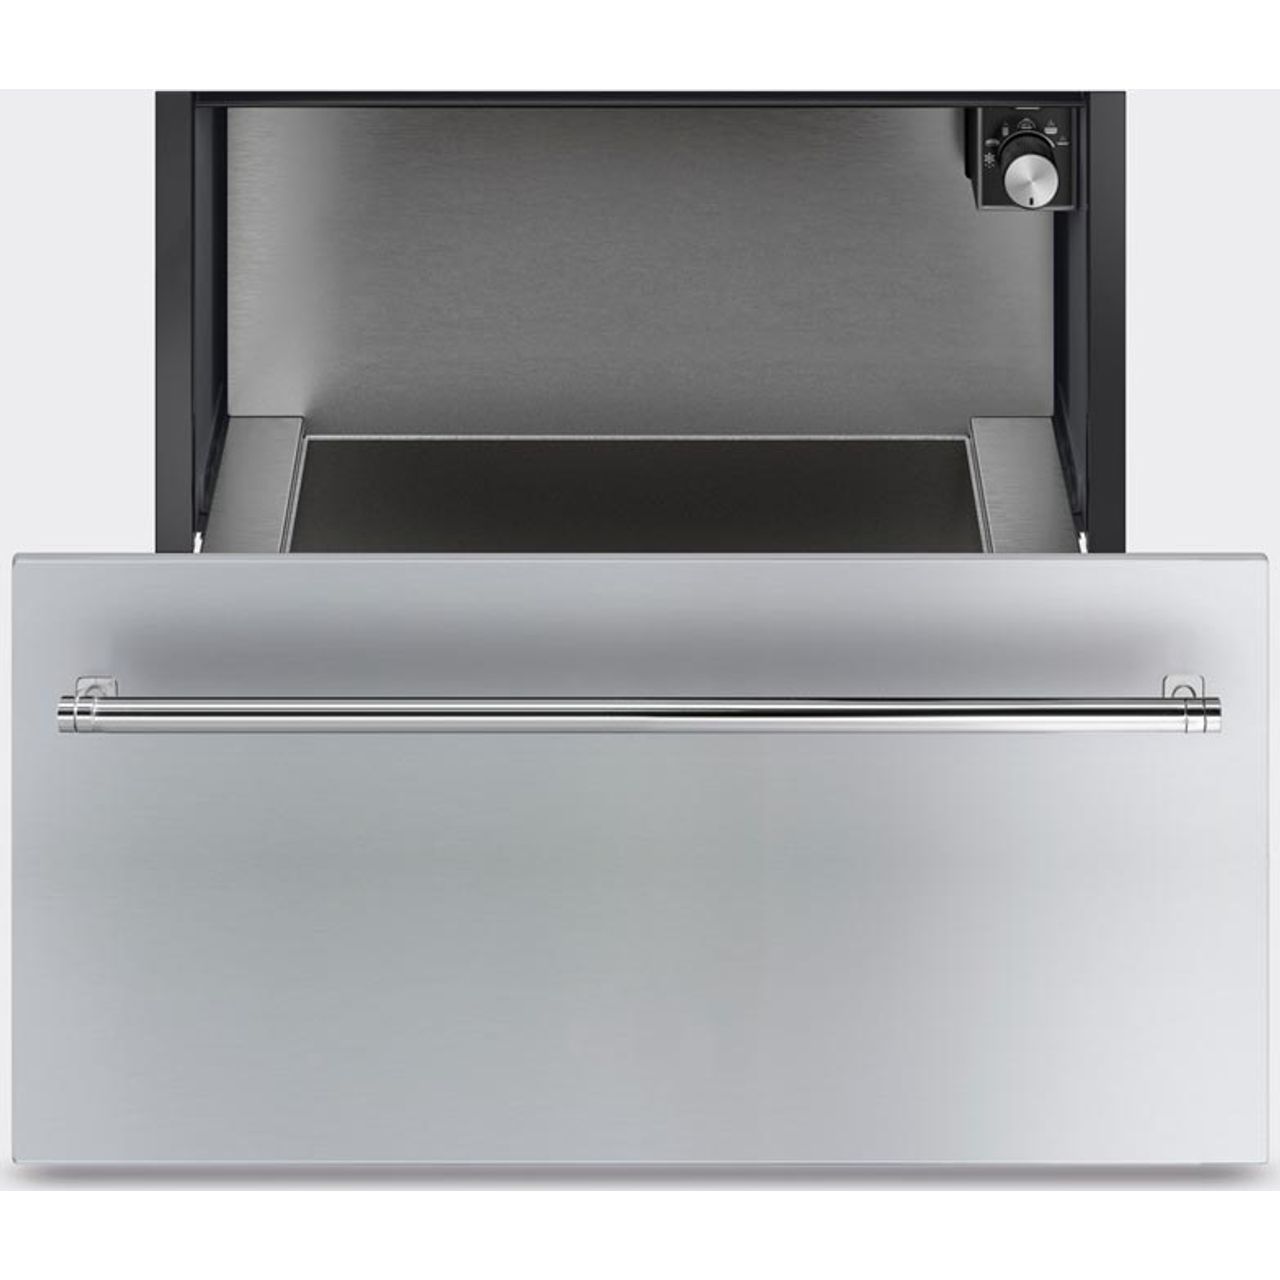 Smeg Classic CR329X Built In Warming Drawer Review